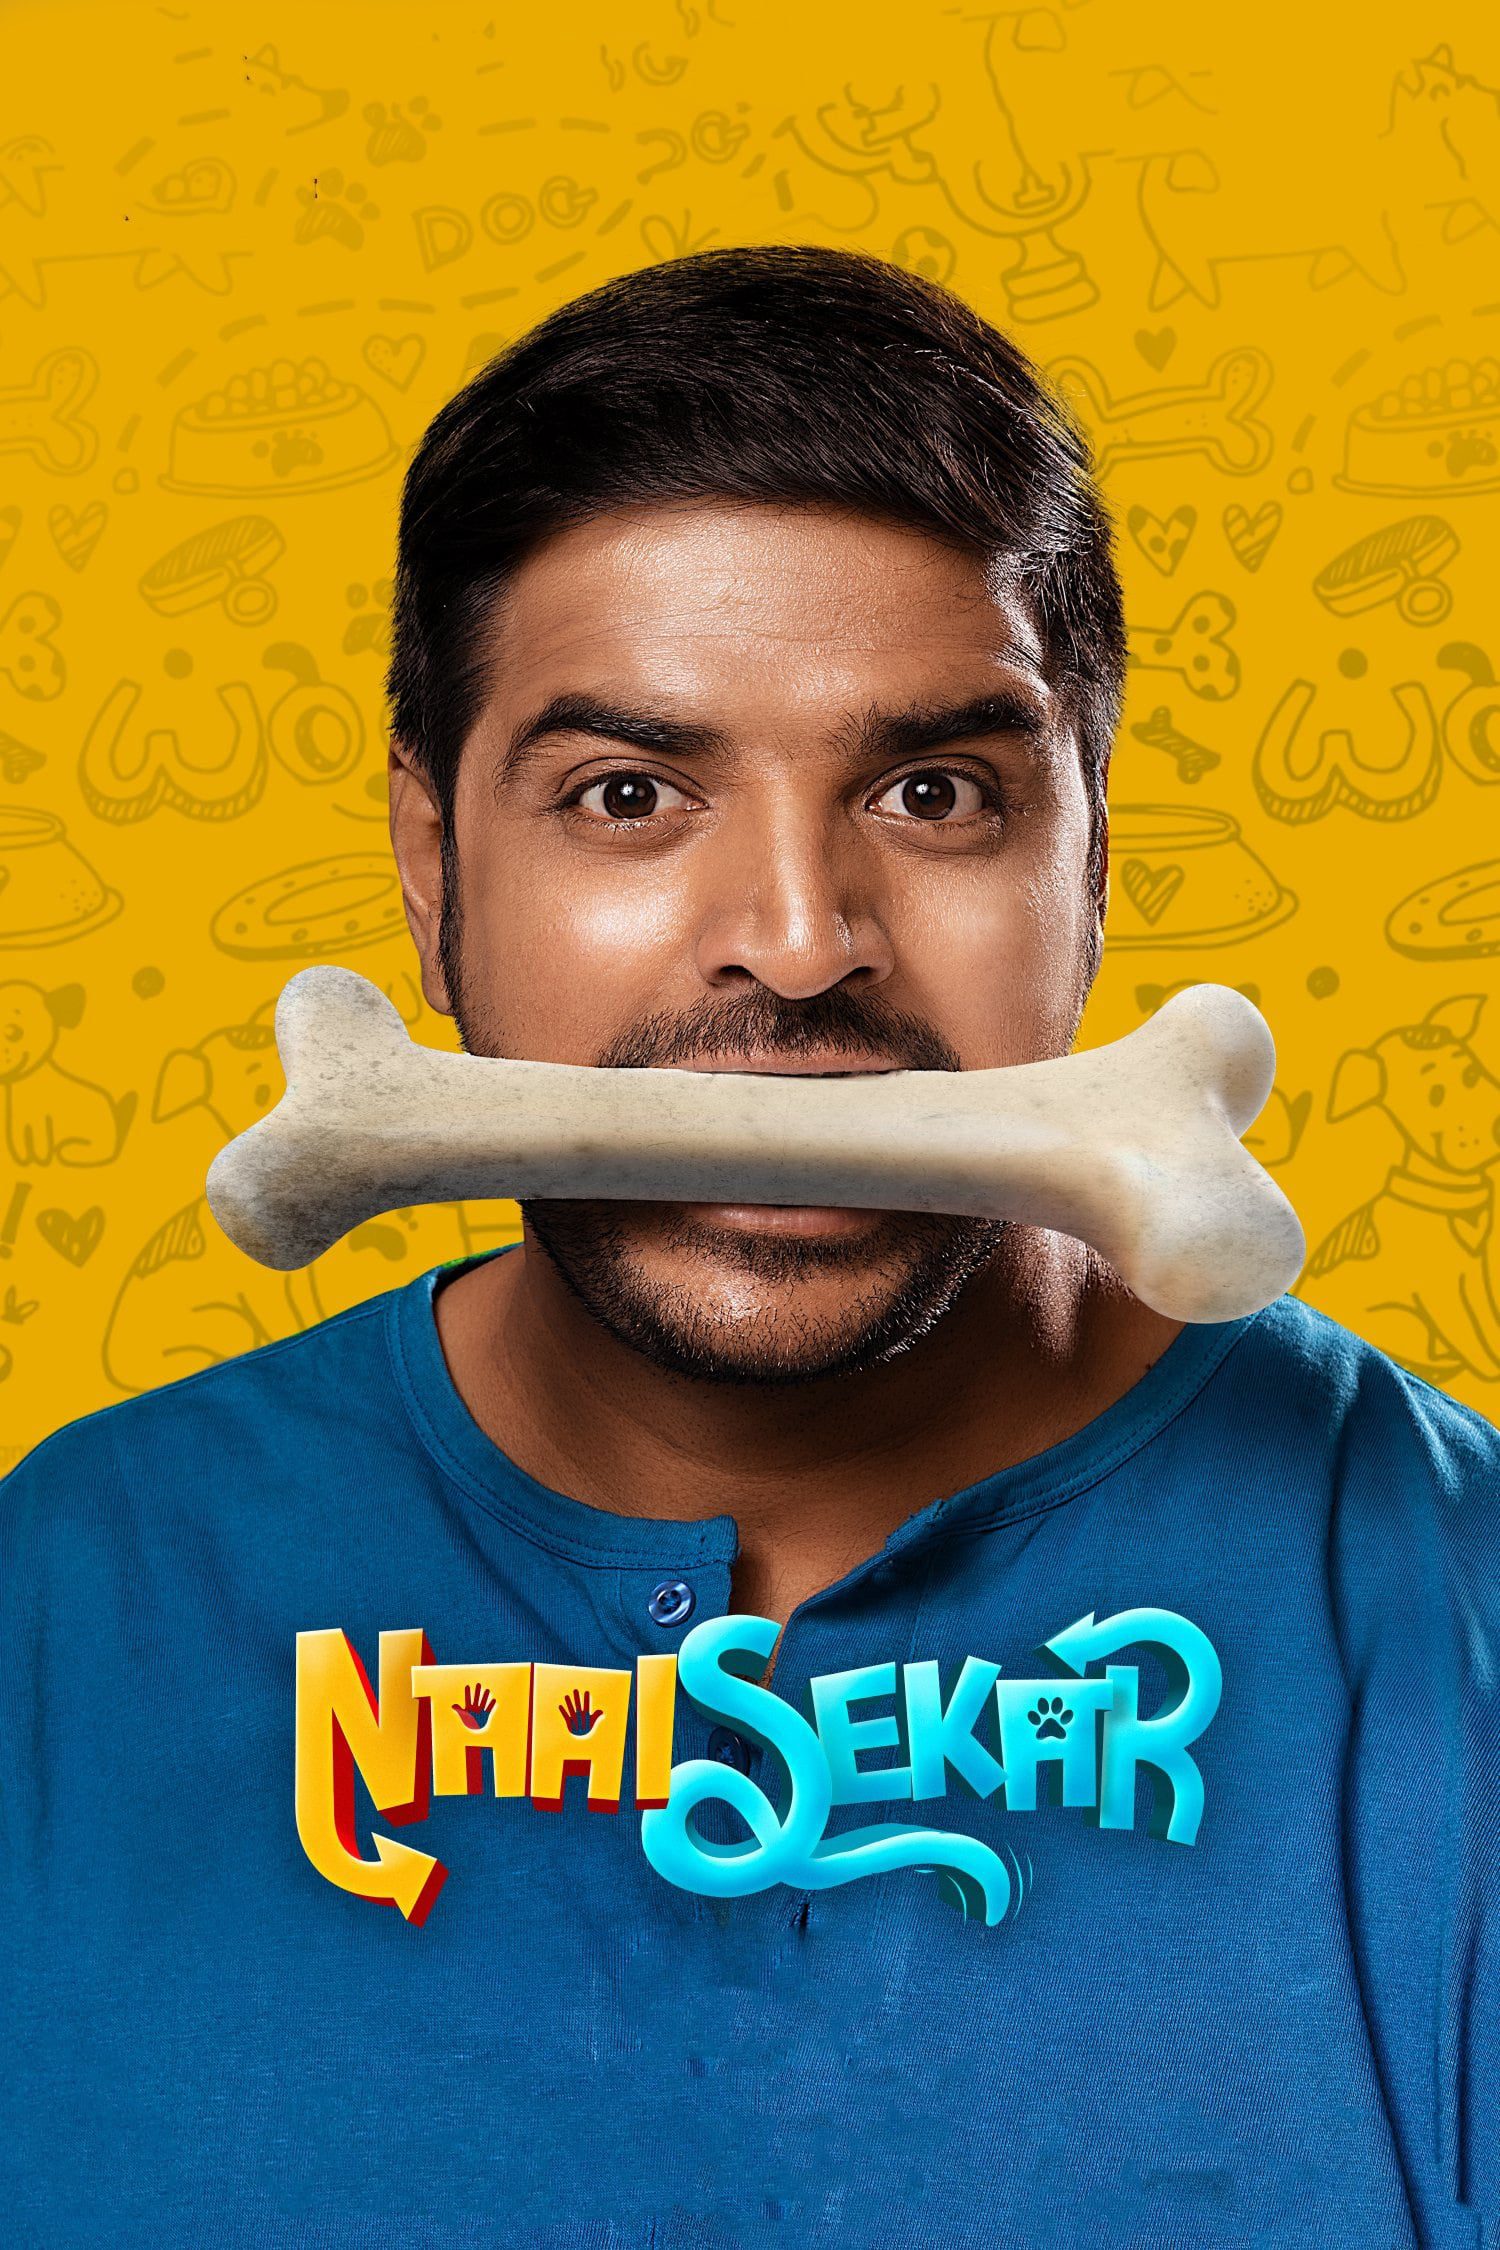 Poster for the movie "Naai Sekar"